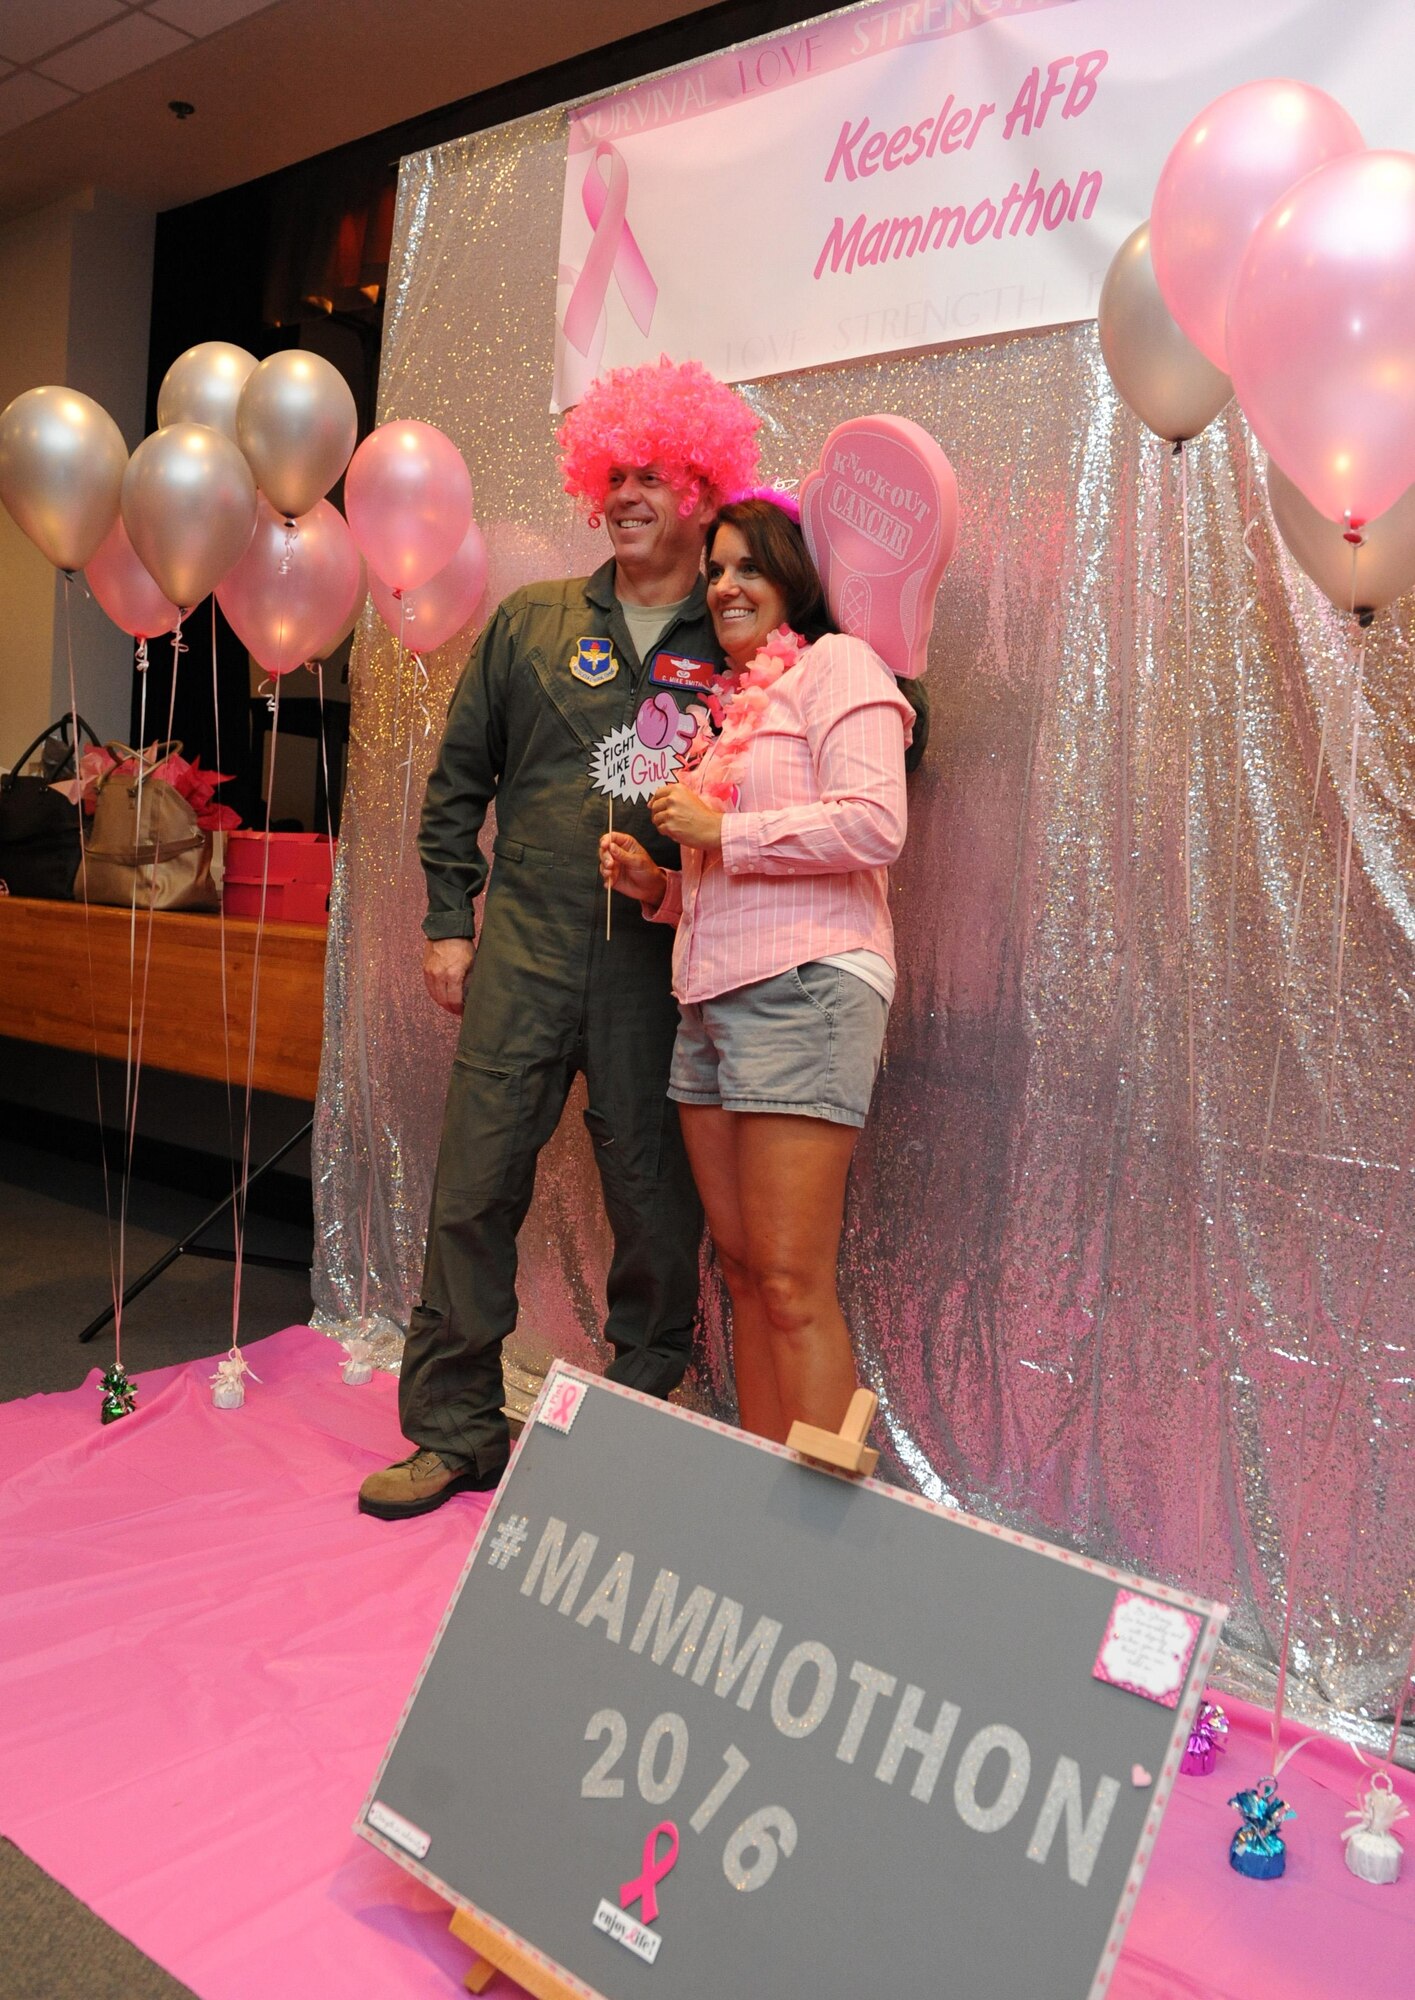 Col. C. Mike Smith, 81st Training Wing vice commander, and his wife, Kristi, pose for a photo during the 5th Annual Mammothon Cancer Screening and Preventative Health Fair at the Don Wylie Auditorium Oct. 28, 2016, on Keesler Air Force Base, Miss. The walk-in event included screenings for multiple types of cancer and chronic diseases in honor of Breast Cancer Awareness Month. Flu shots were also provided upon request. (U.S. Air Force photo by Kemberly Groue/Released)